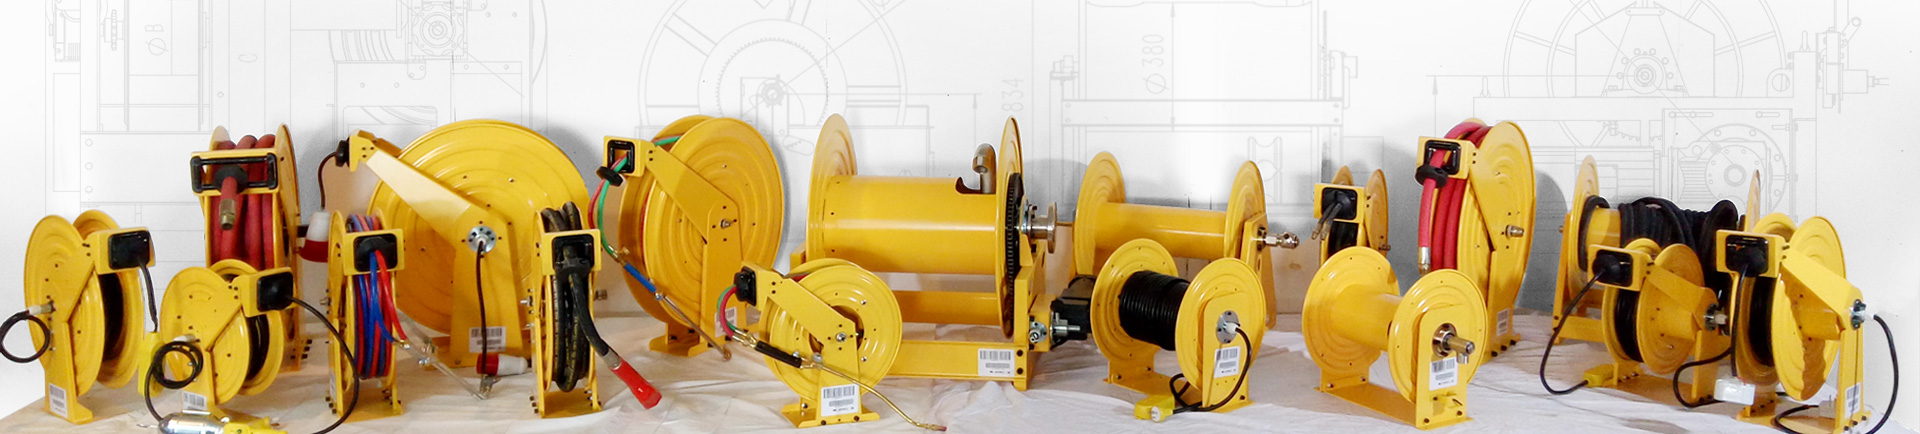 Wholesale Flat Hose Reel Products at Factory Prices from Manufacturers in  China, India, Korea, etc.